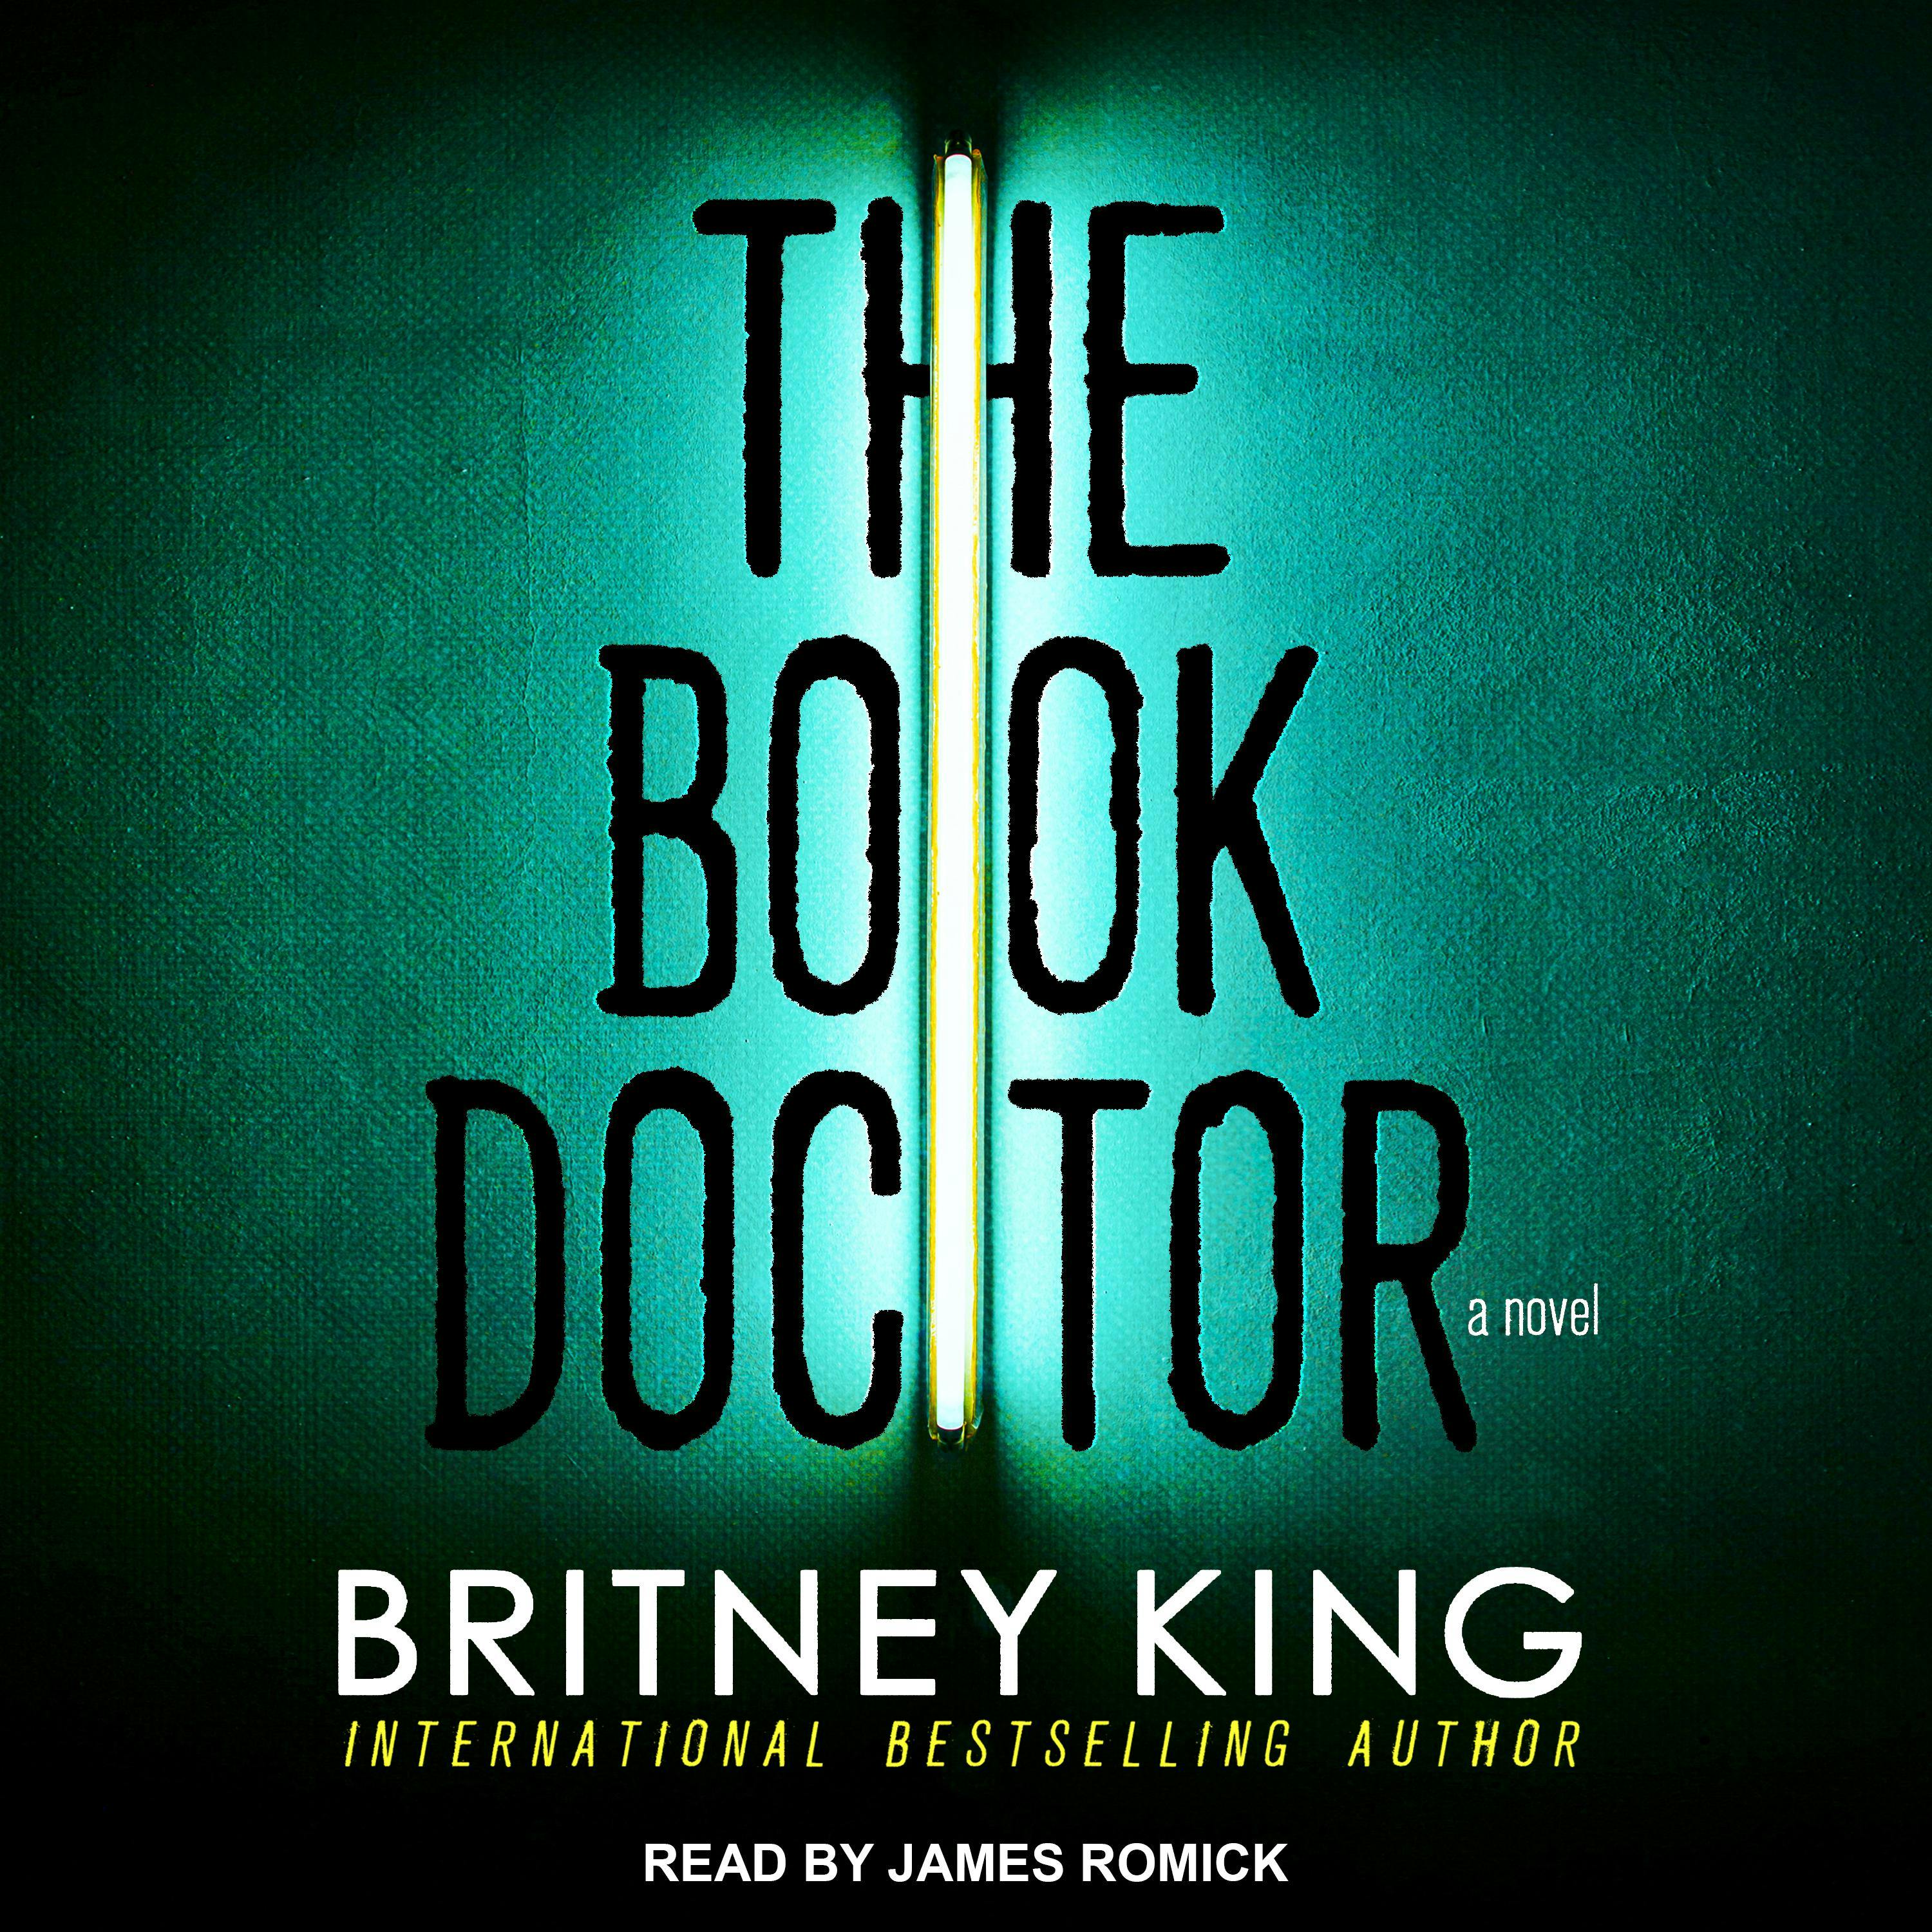 The Book Doctor - Britney King